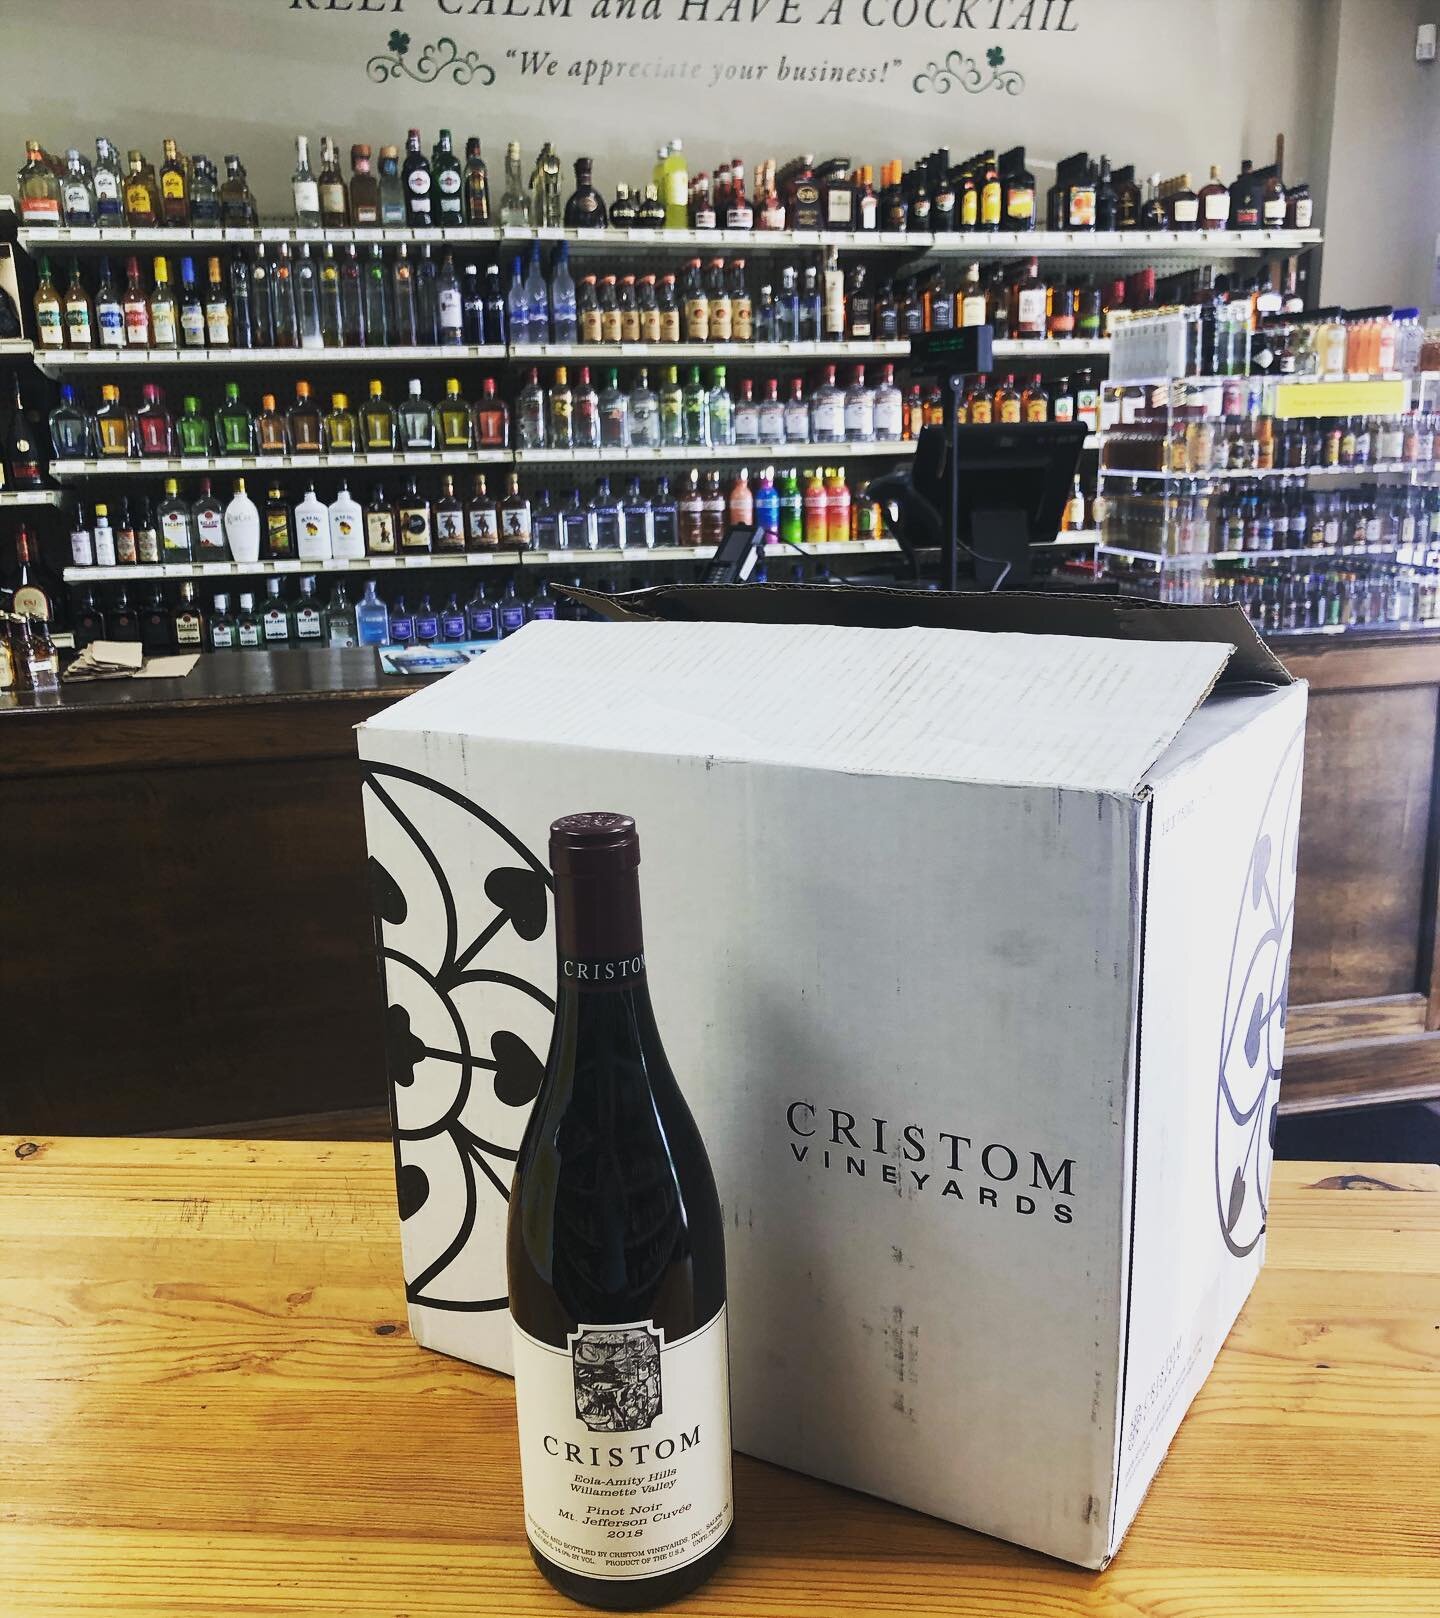 New shipment of @cristomwine Cristom Vineyard's Mt Jefferson Cuvée in this week. For many years this has consistently been my favorite, versatile, Pinot. Perhaps because of 20 year friendship with owner @vinochris , or because it comes from my Orego